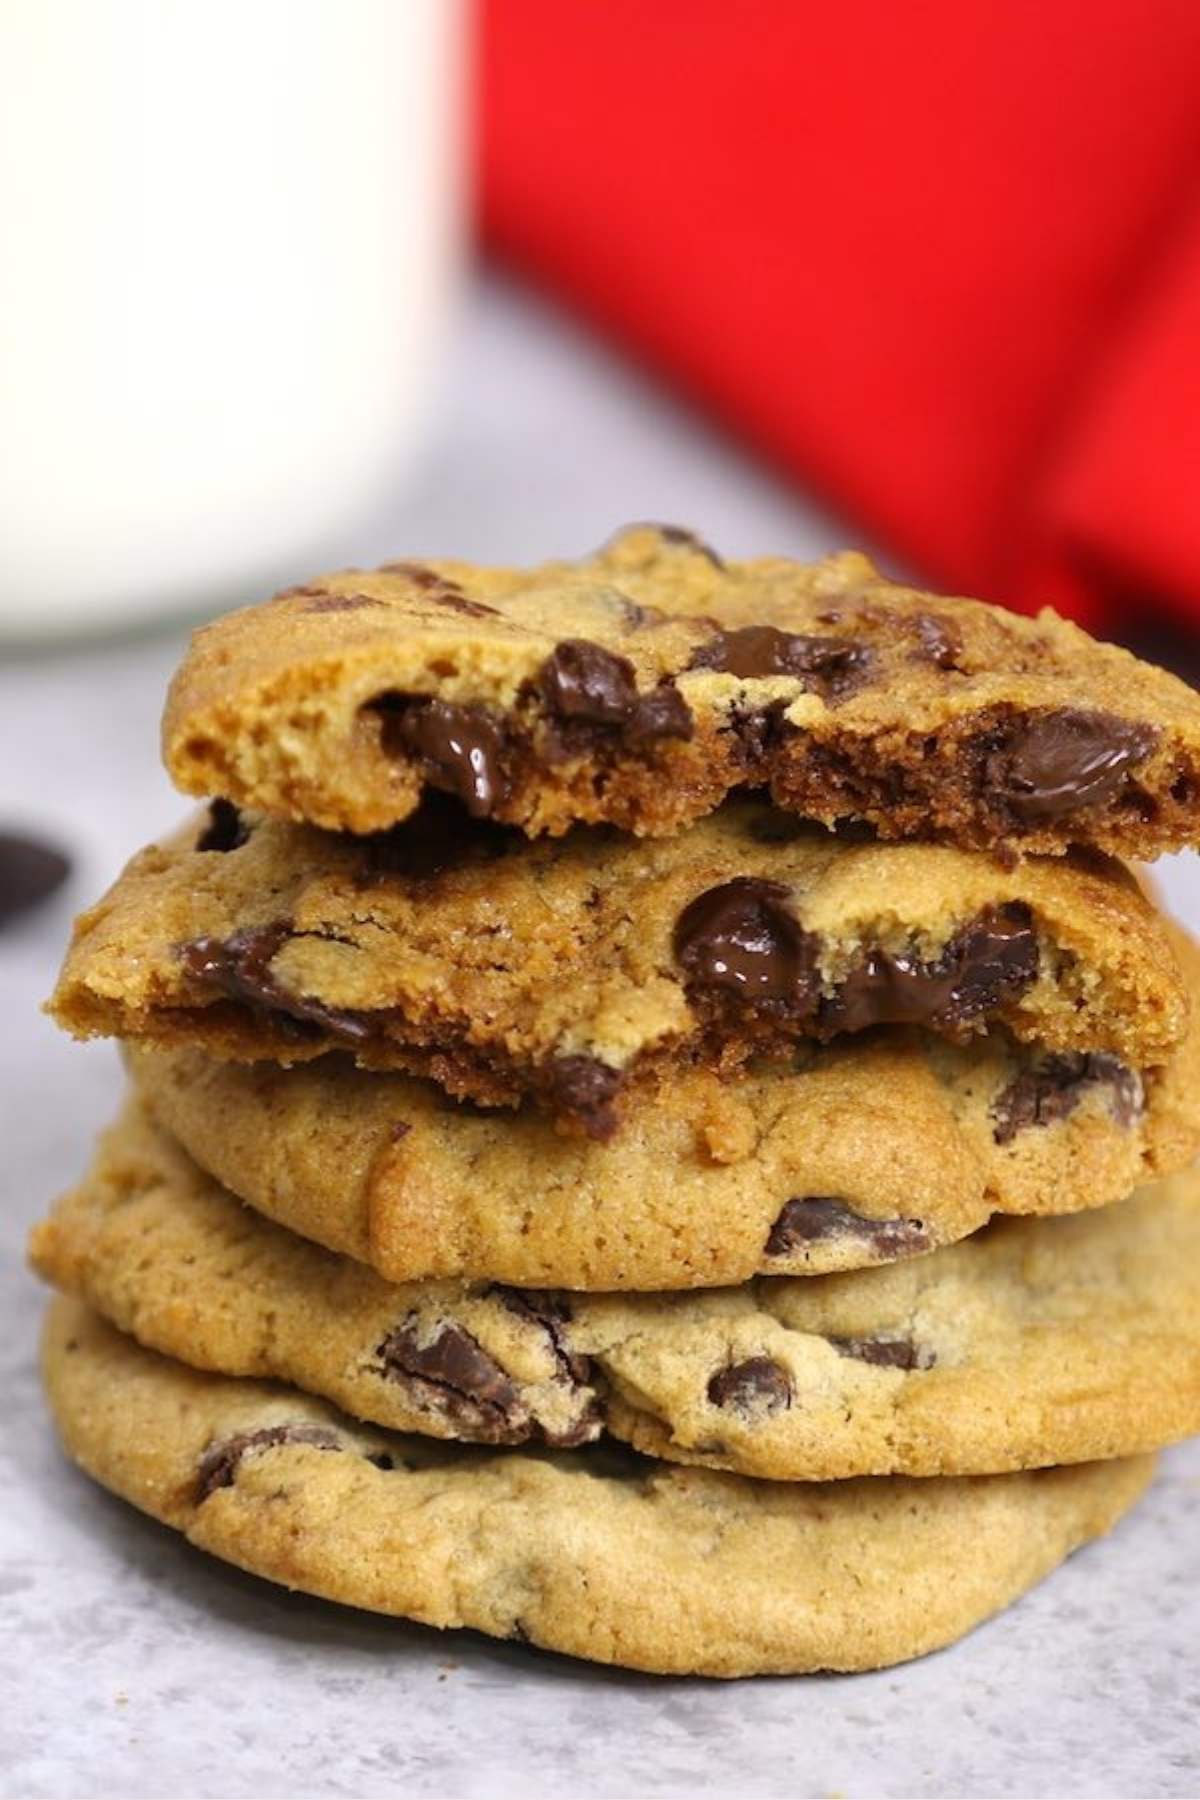 These fluffy and delicious chocolate chip cookies are made without brown sugar! There are no special ingredients or chilling required. So simple and easy to make. For us, there’s no competition. There’s something magical about these chocolate chip cookies, whether you like them crispy or chewy, with nuts or without.